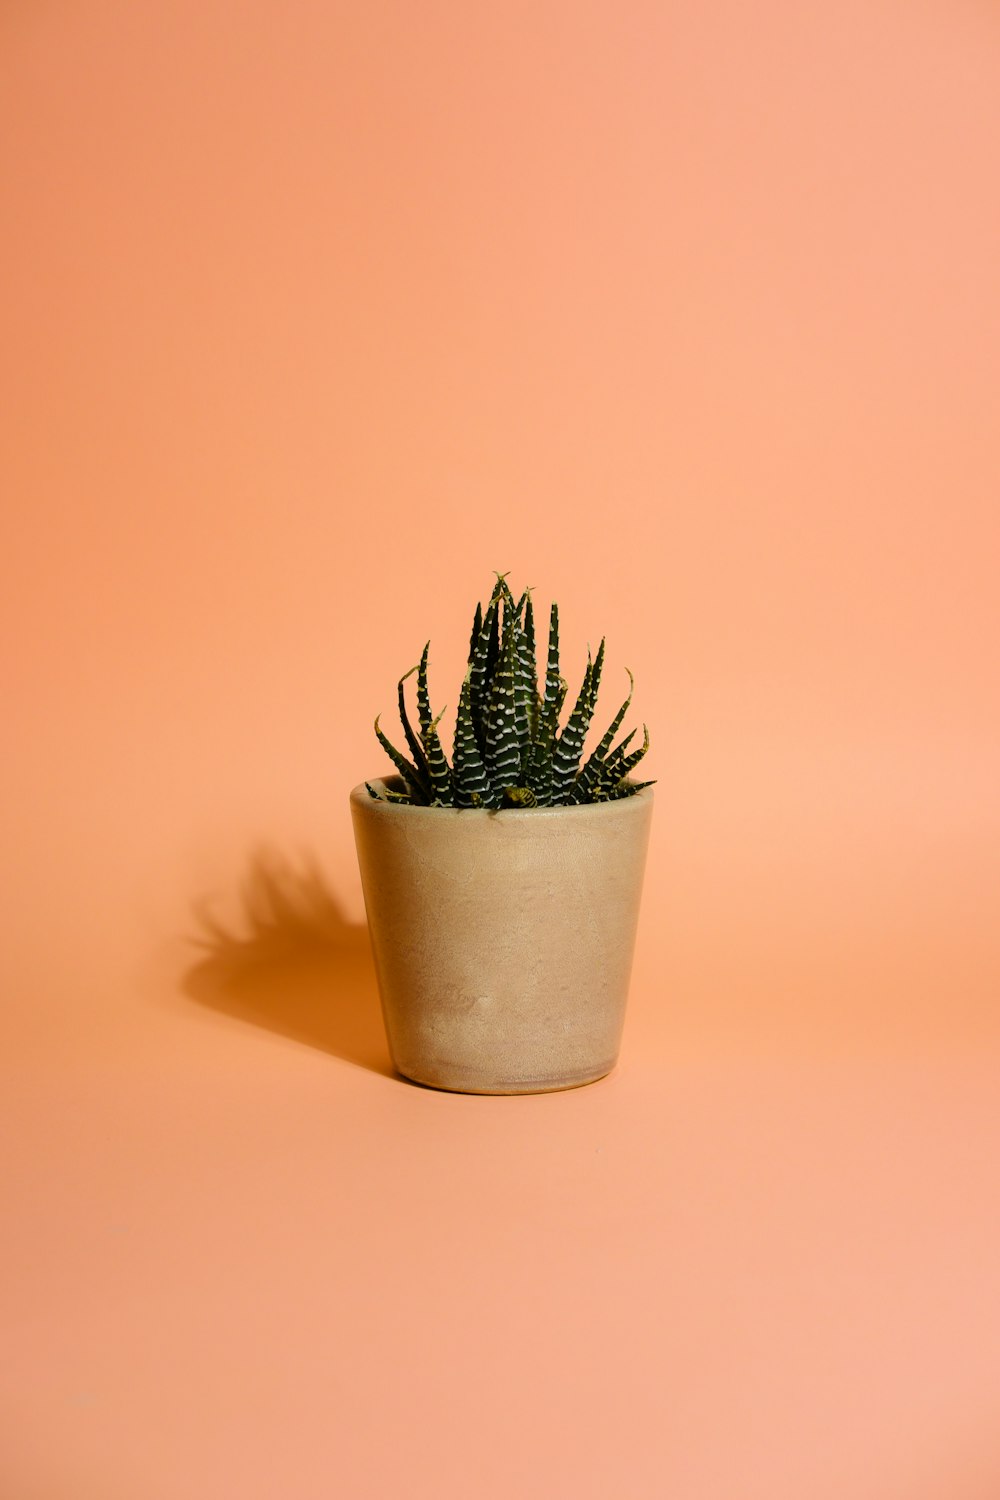 a small cactus in a white pot on a pink background